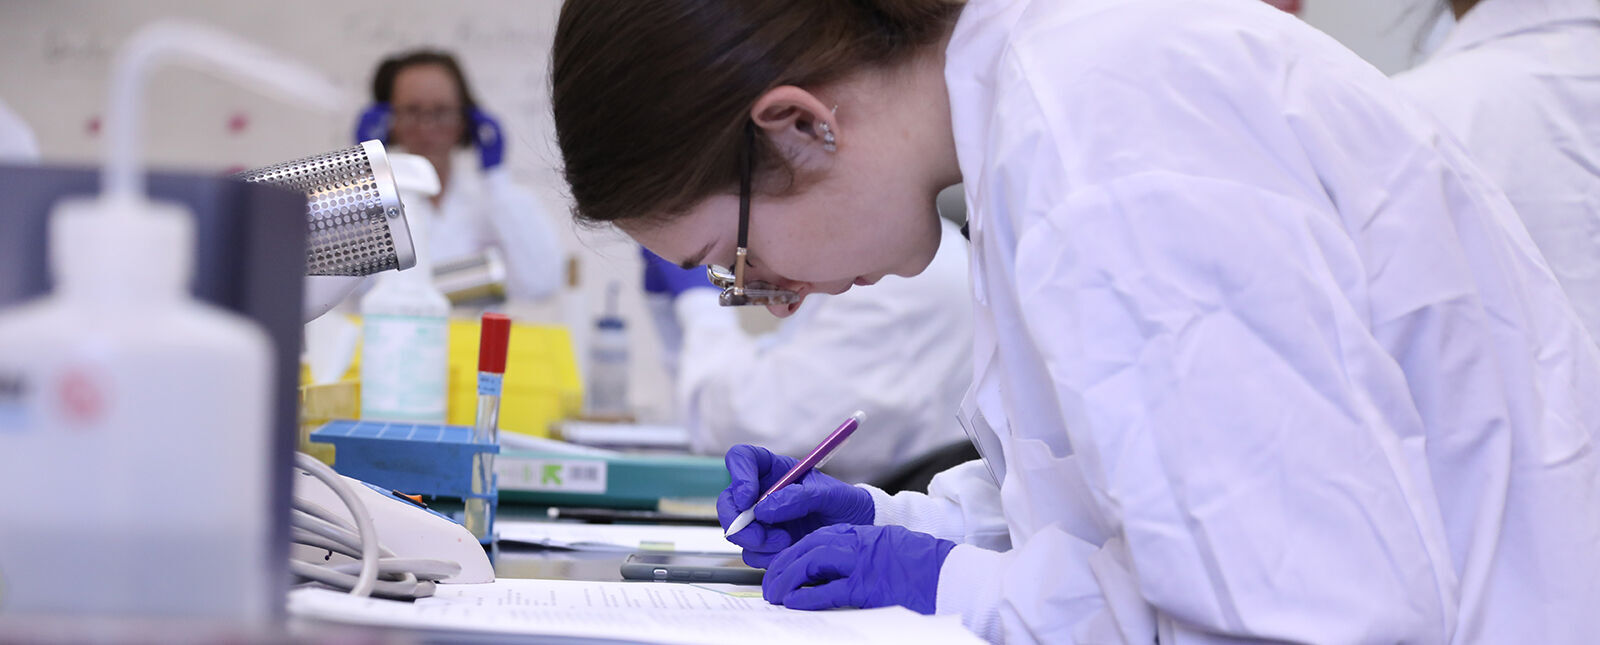 A female student writes notes in a lab